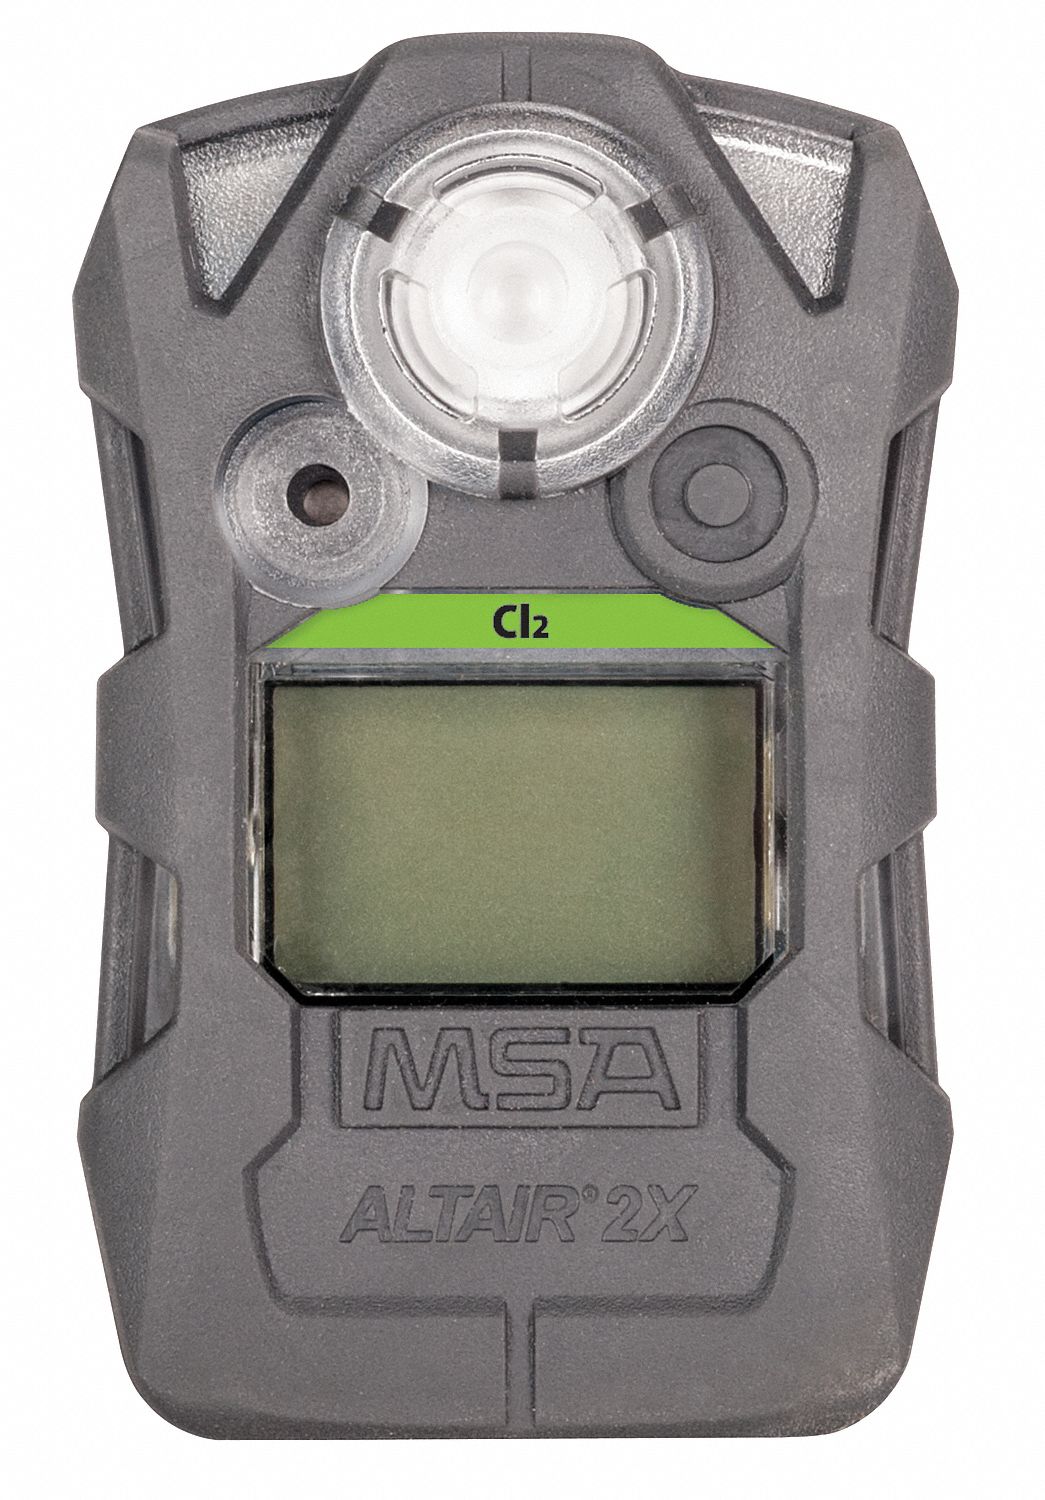 33RJ40 - Gas Detector Gray CL2 0 to 10 ppm